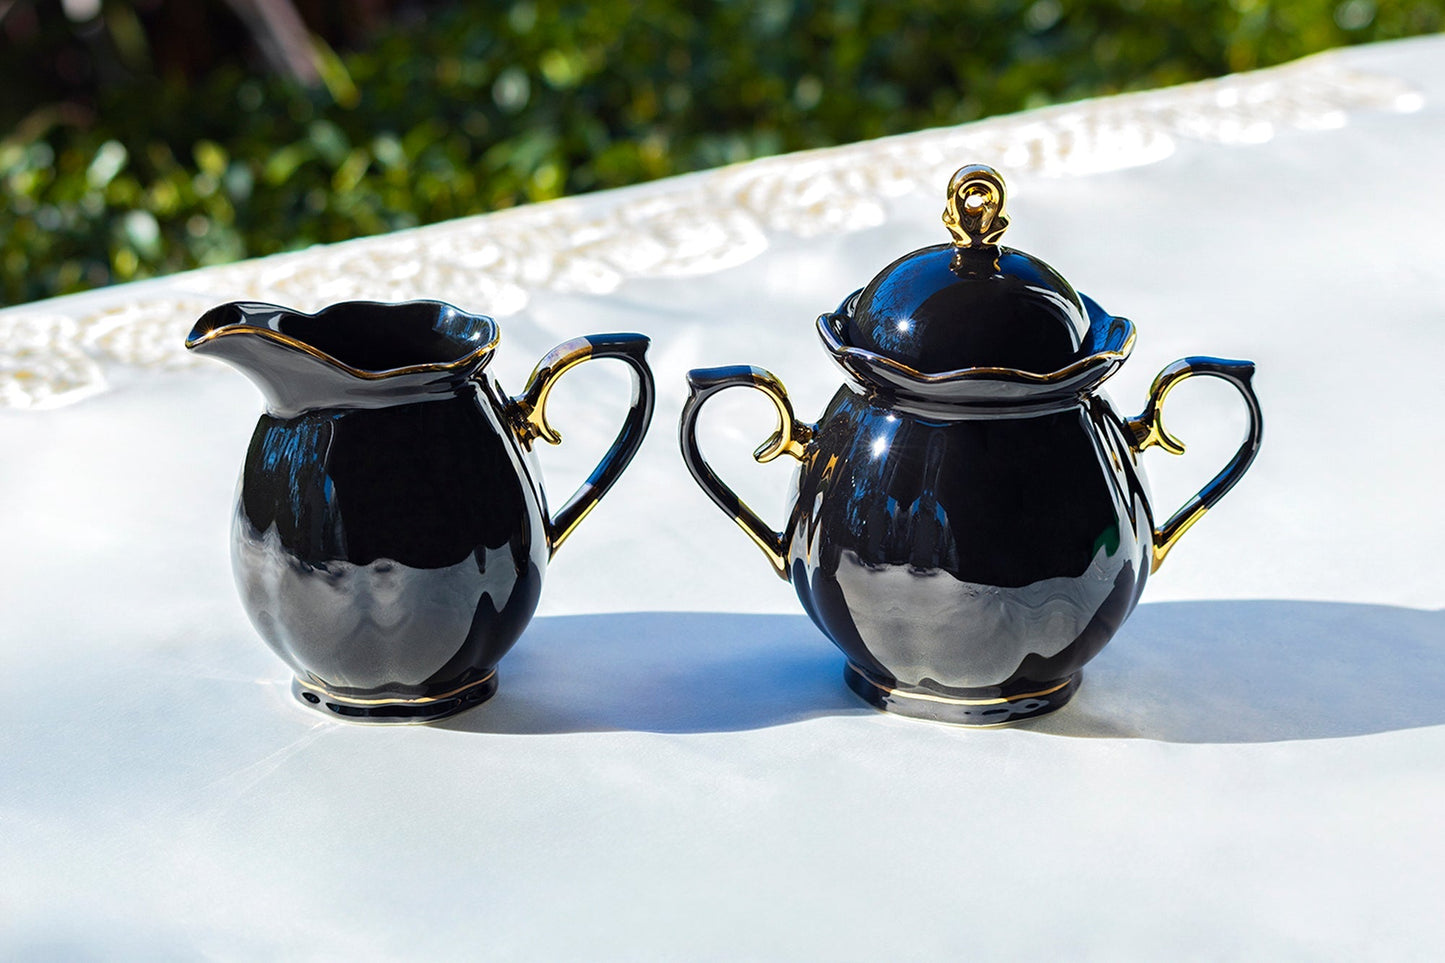 Black Gold Teapot + Sugar Creamer + 4 Witchy Crystal Ball Black Gold Luster Tea Cup and Saucer Sets